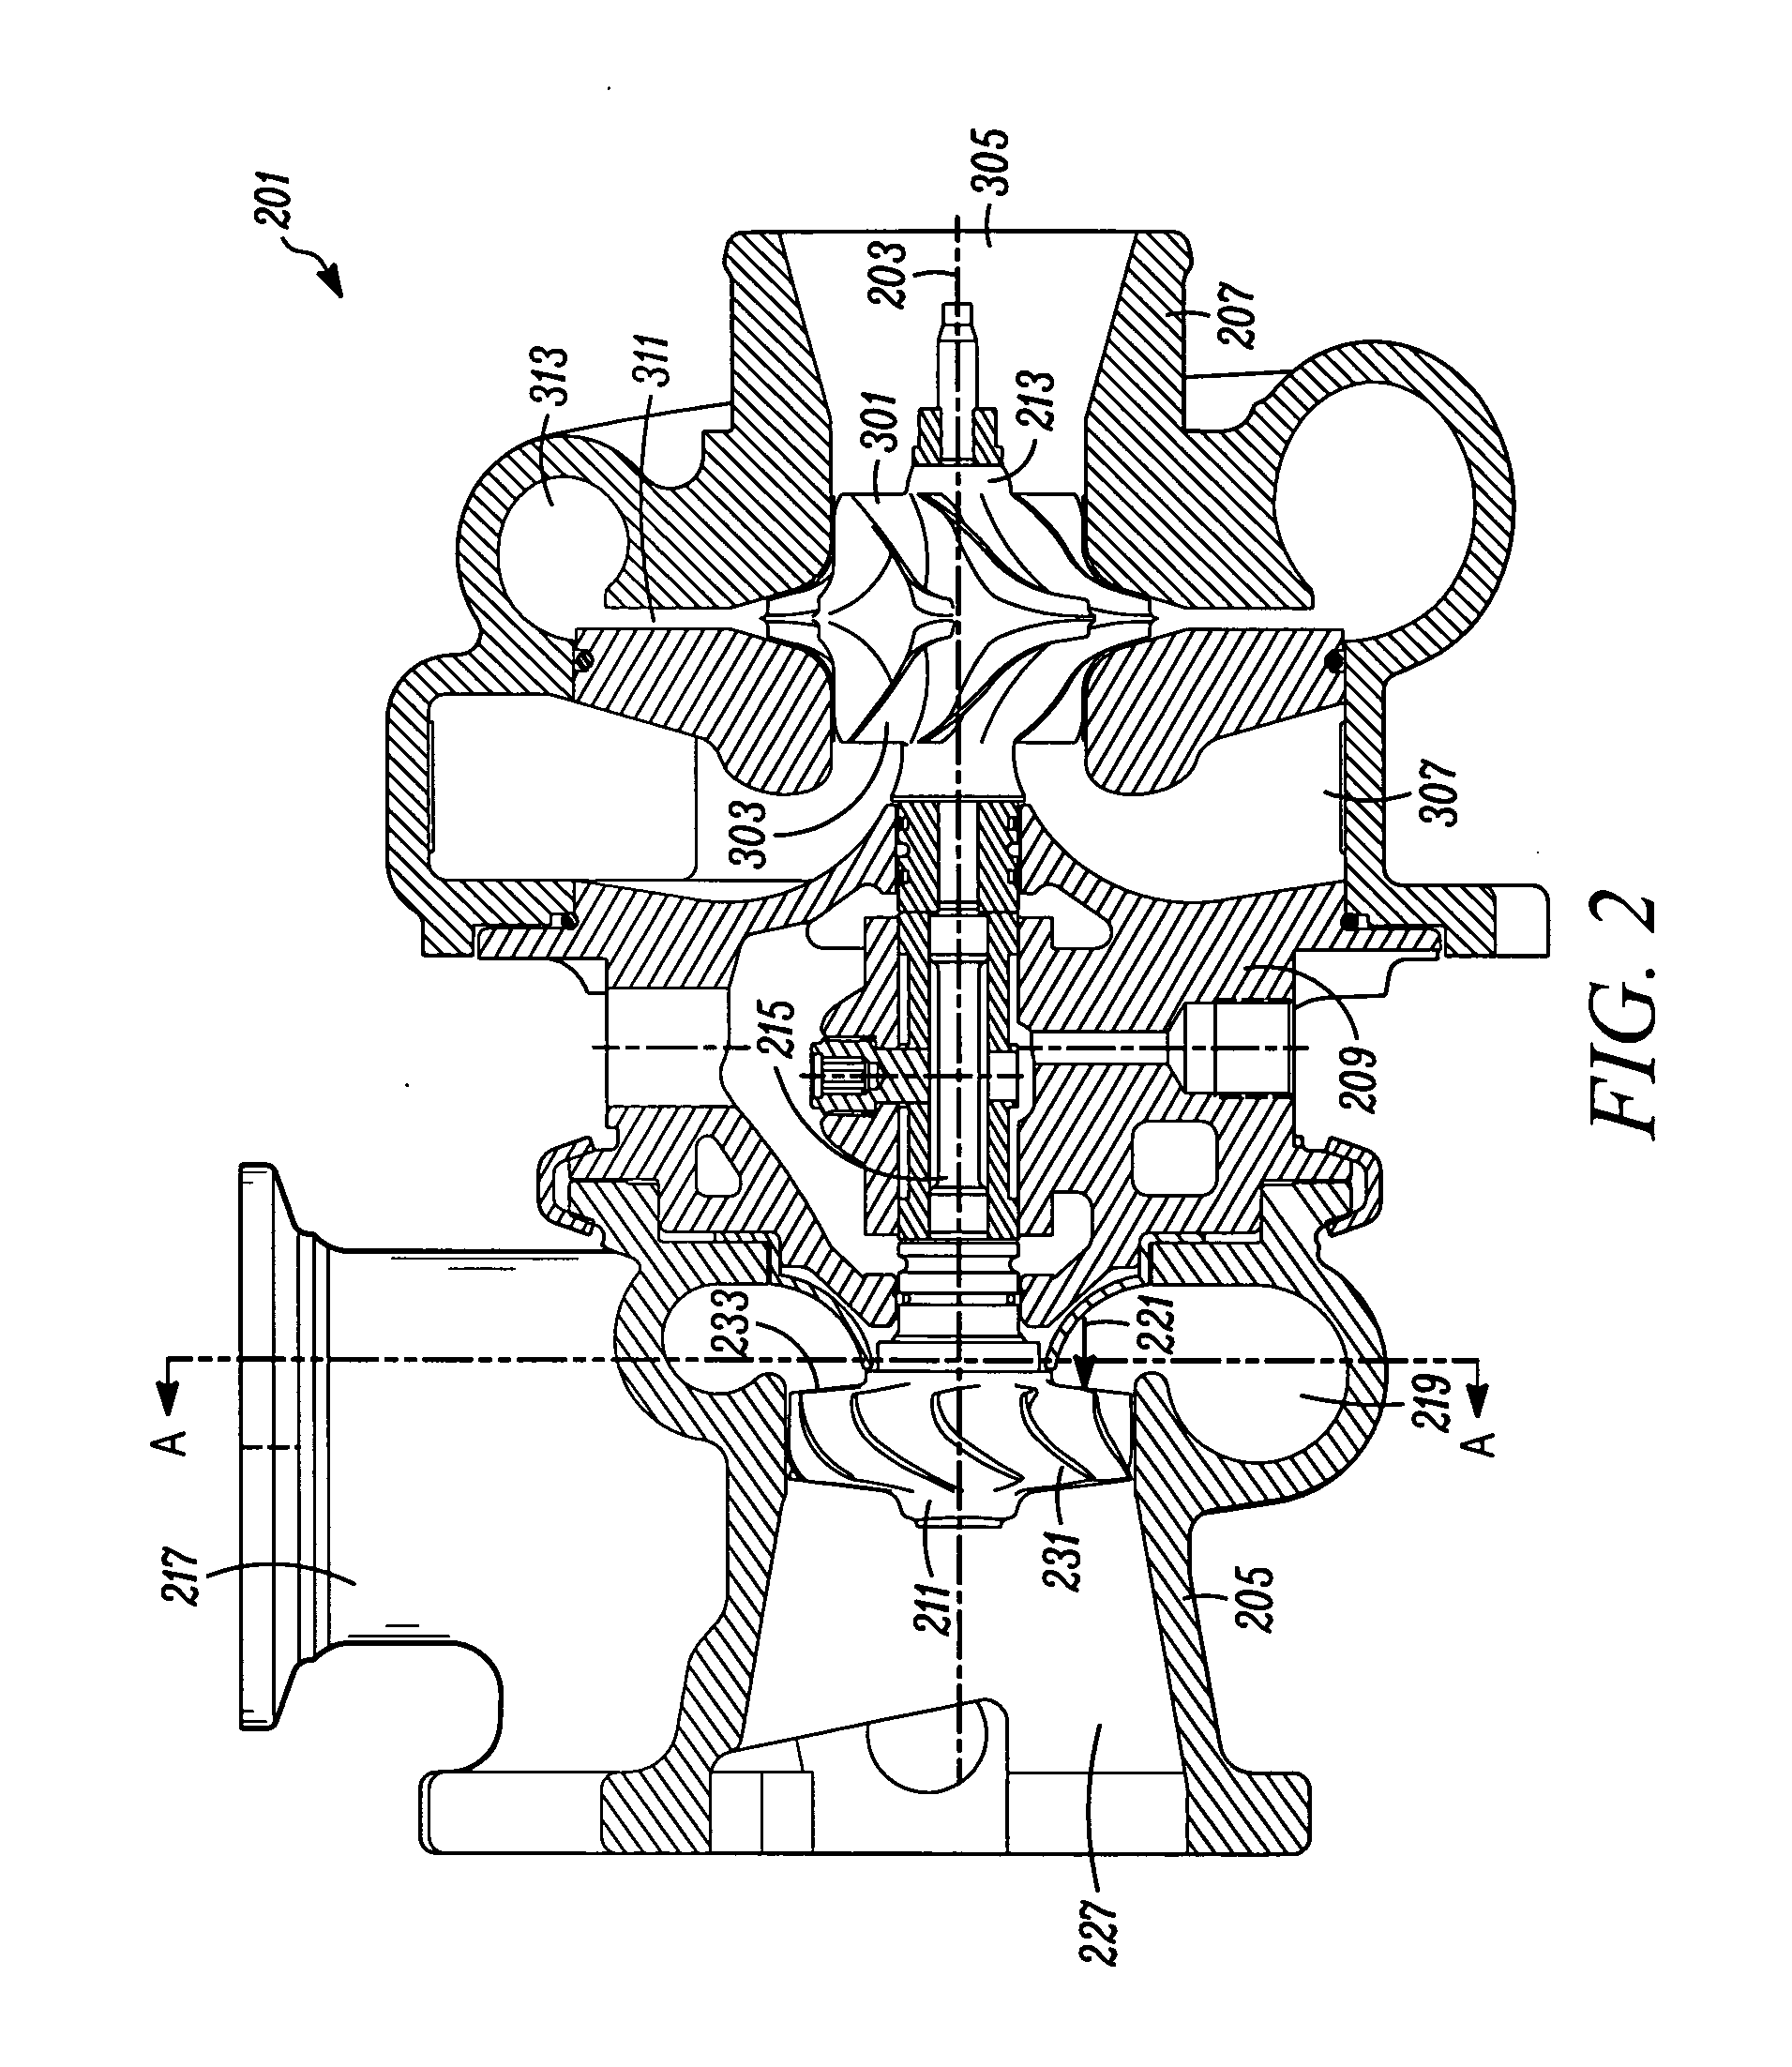 Axial turbine with parallel flow compressor